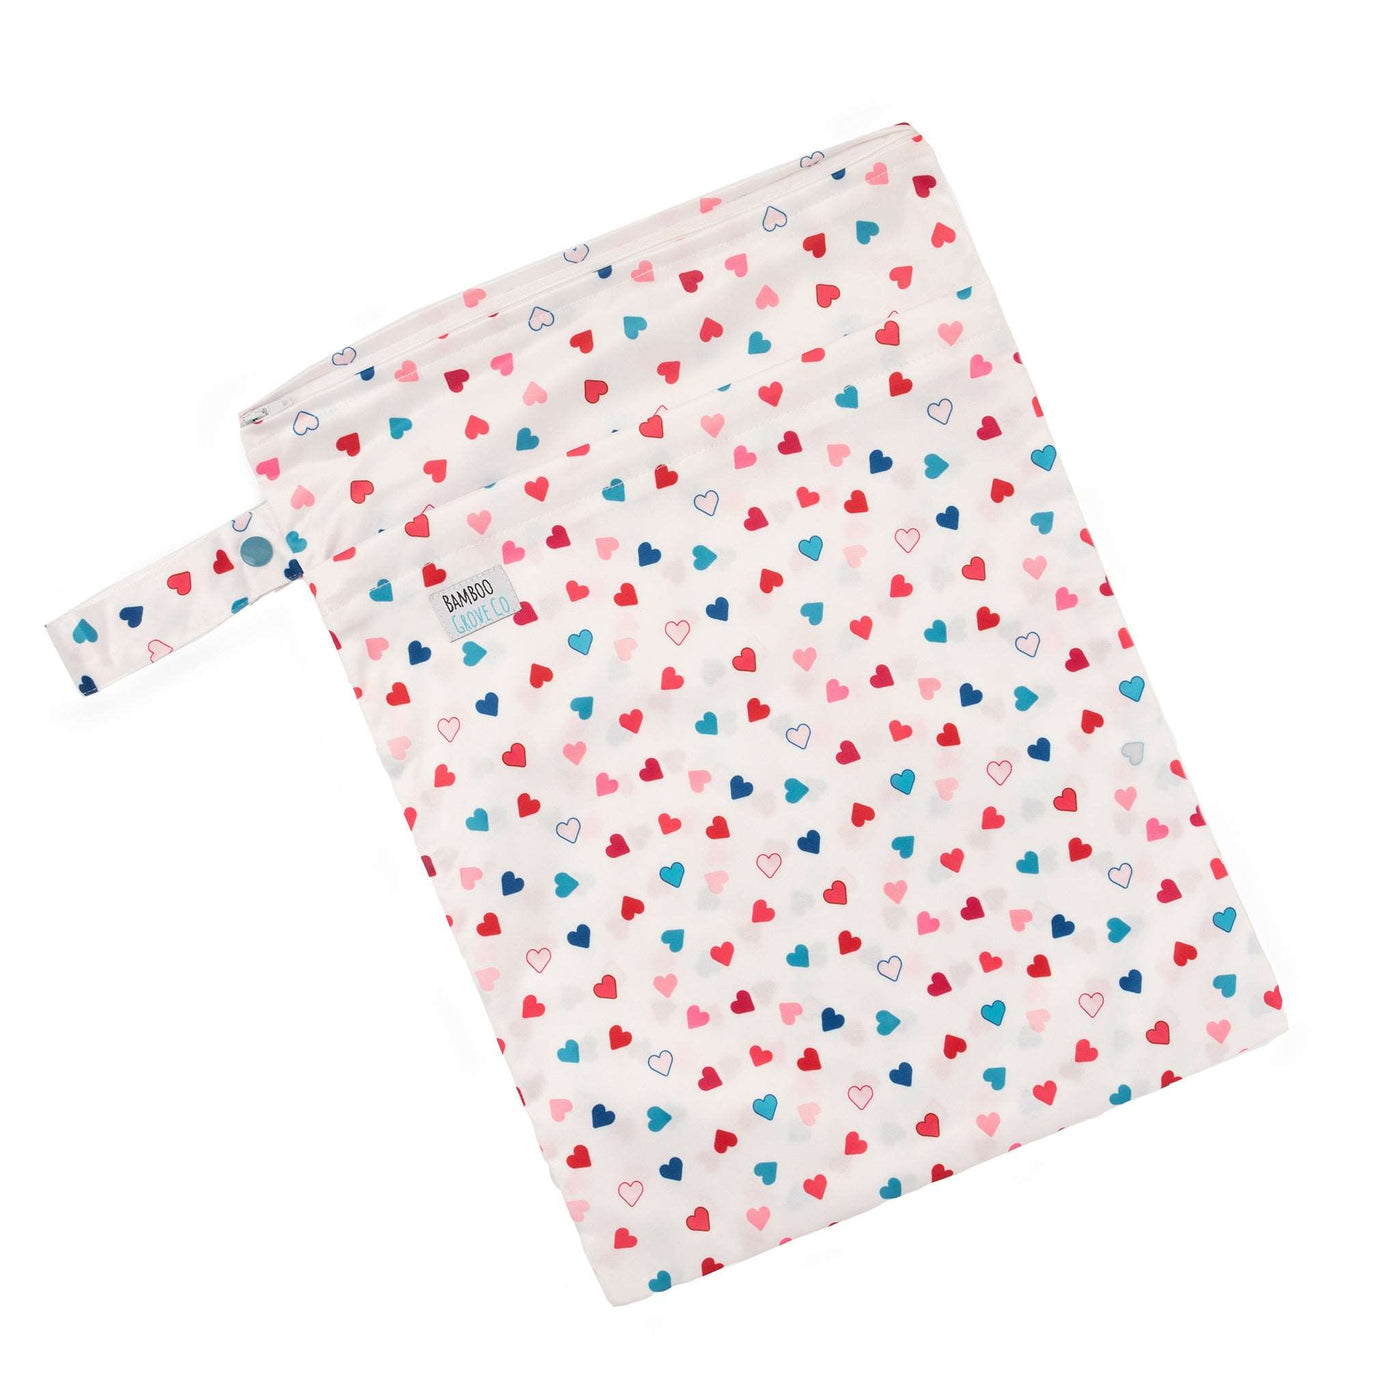 Wetbag for nappies Australia